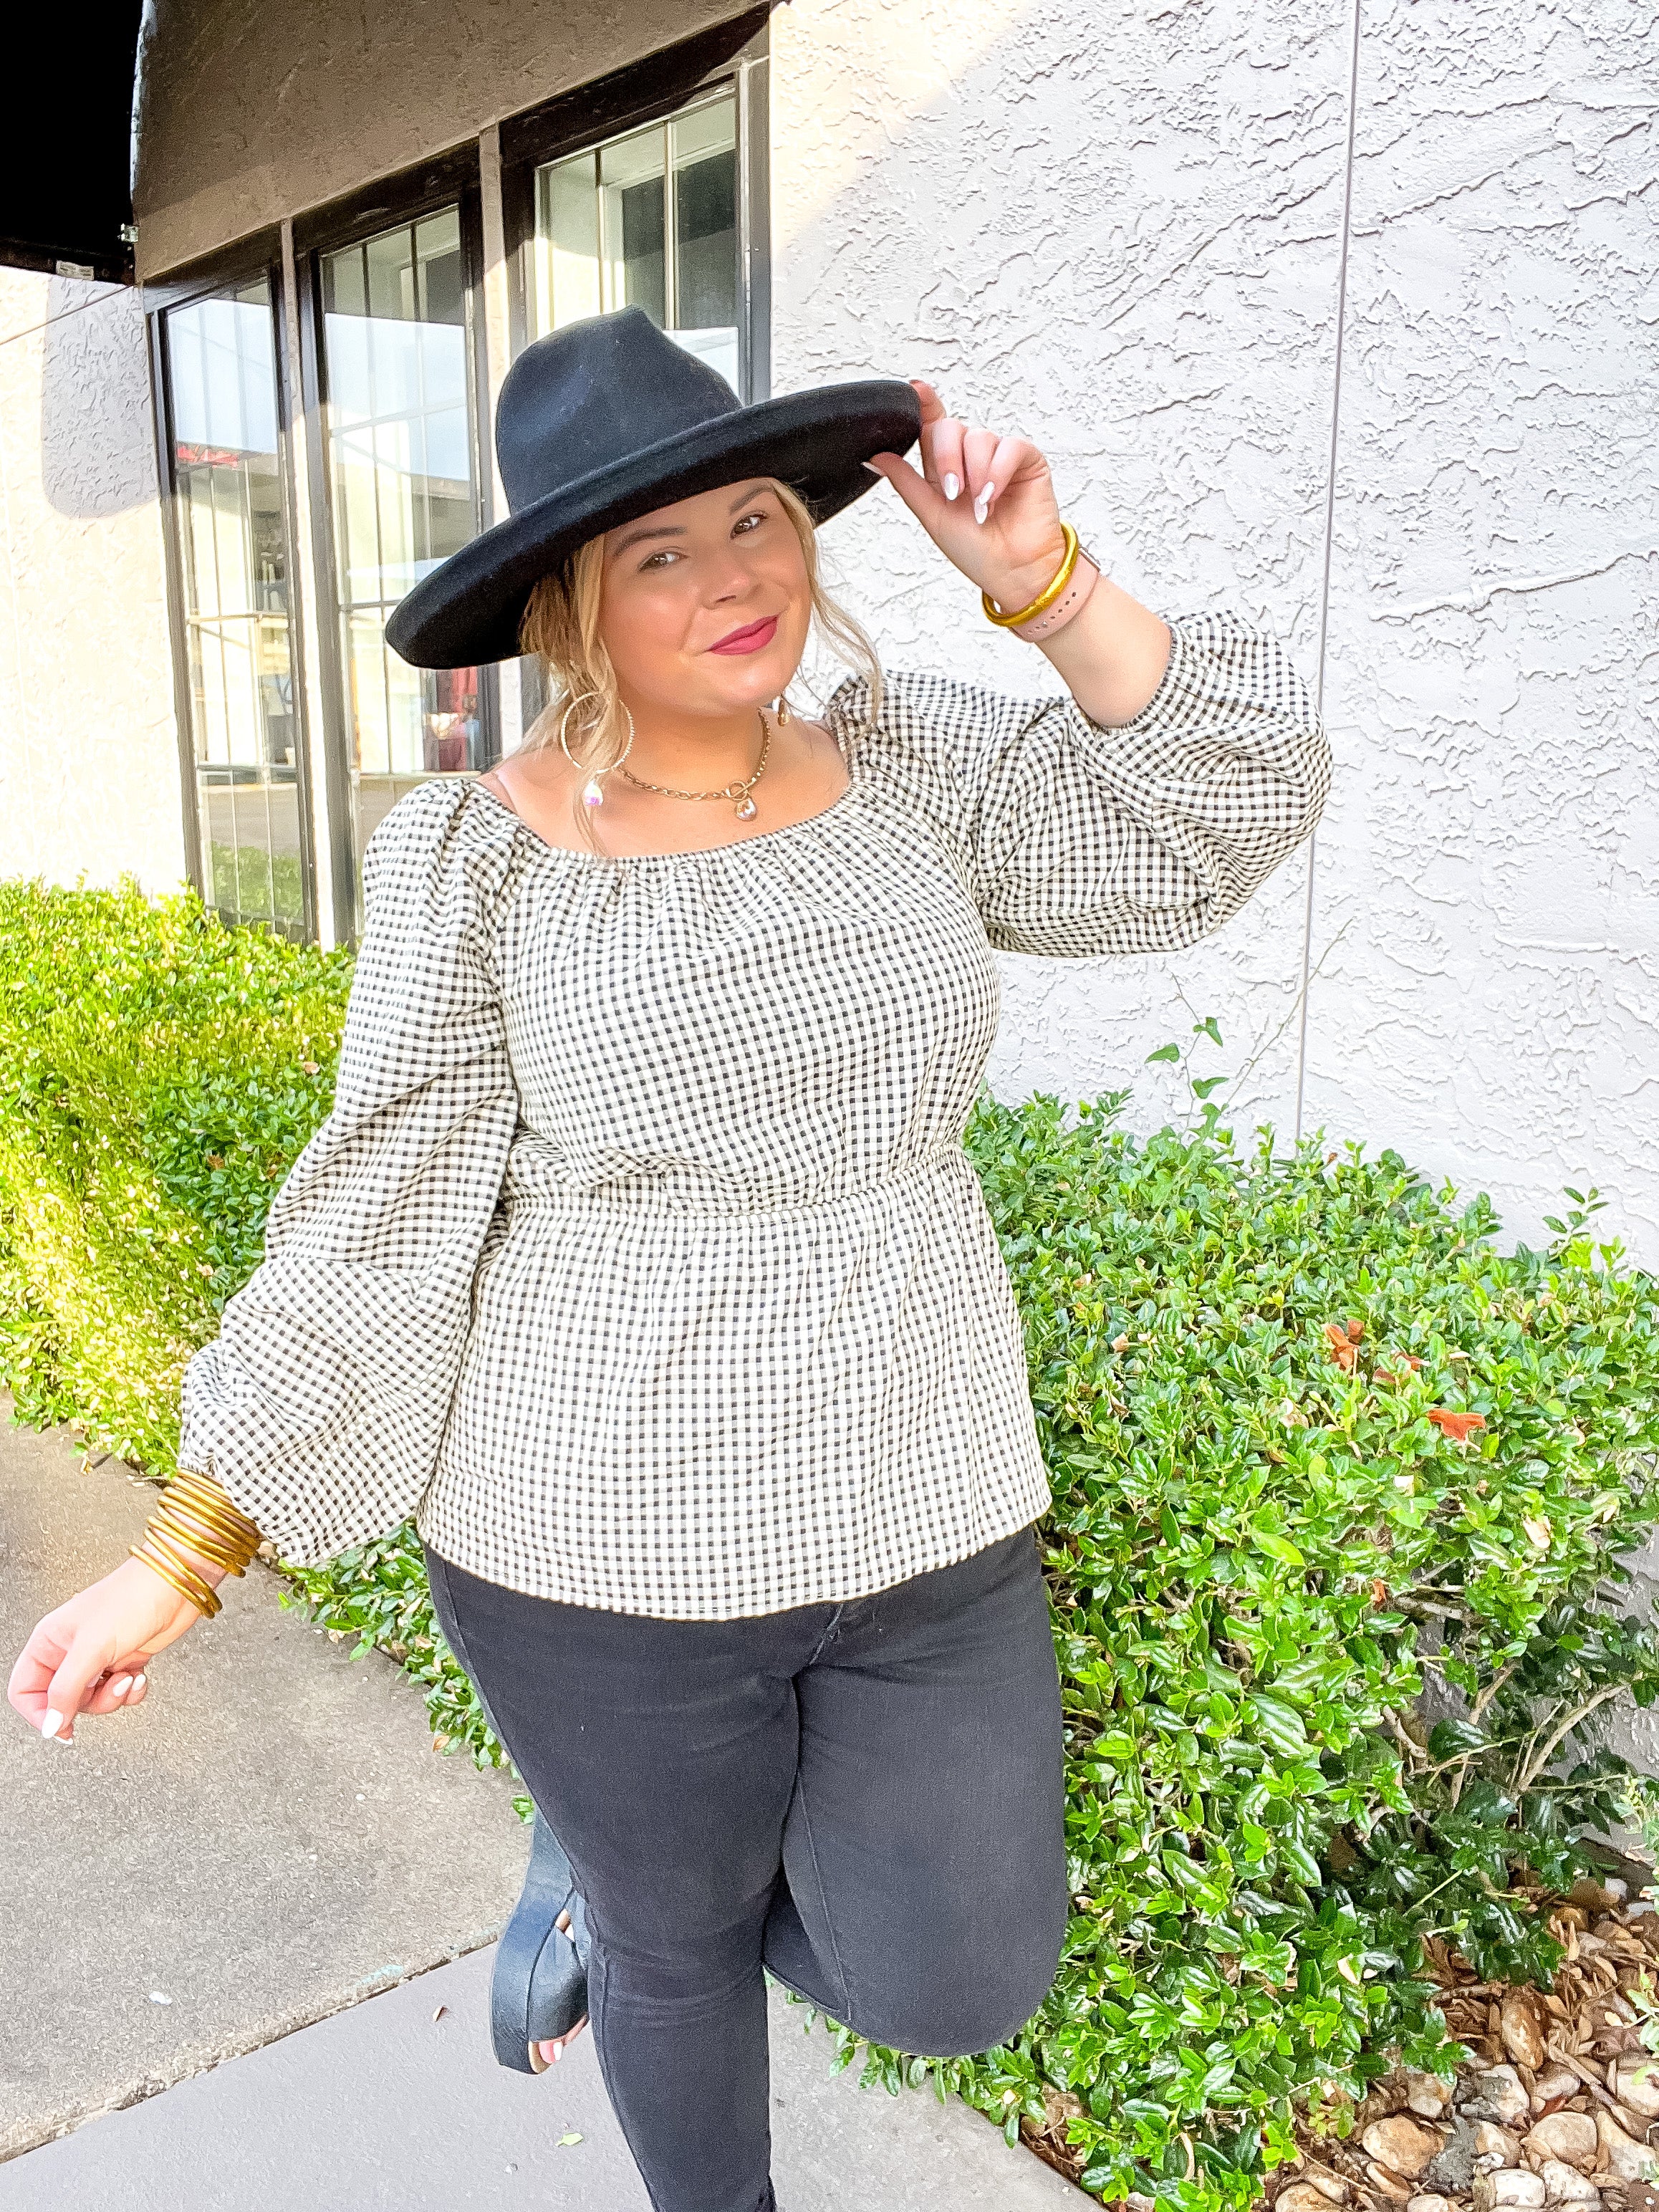 Autumn Sweetness Gingham Peplum Top with Long Sleeves in Black and Ivory - Giddy Up Glamour Boutique